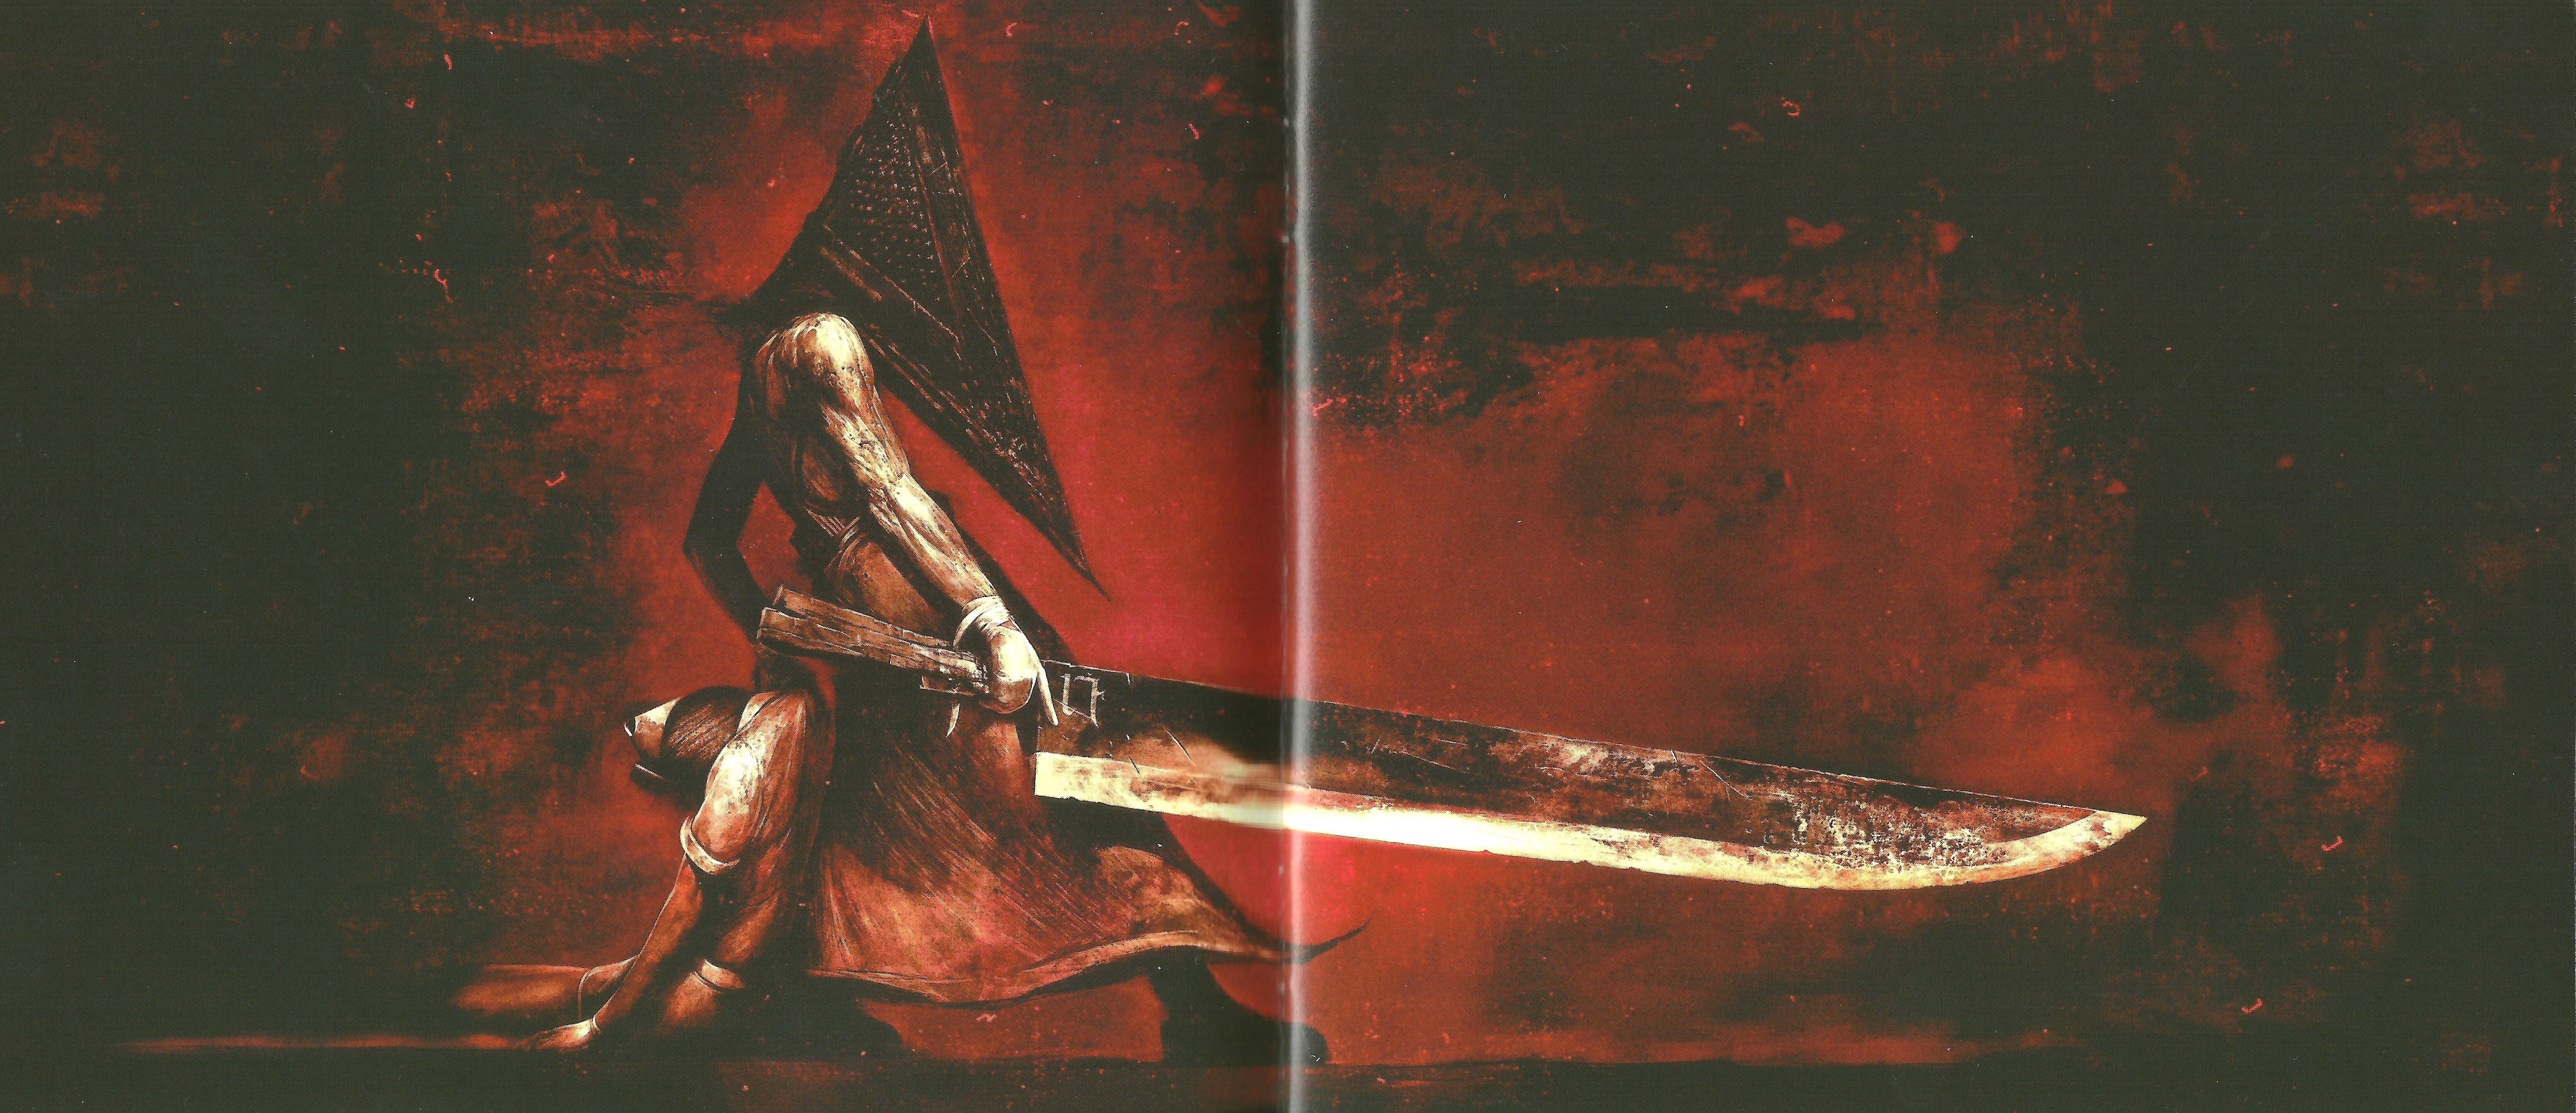 General 6598x2850 panic Silent Hill triangle knife red Pyramid Head video games video game characters Video Game Horror creature video game art